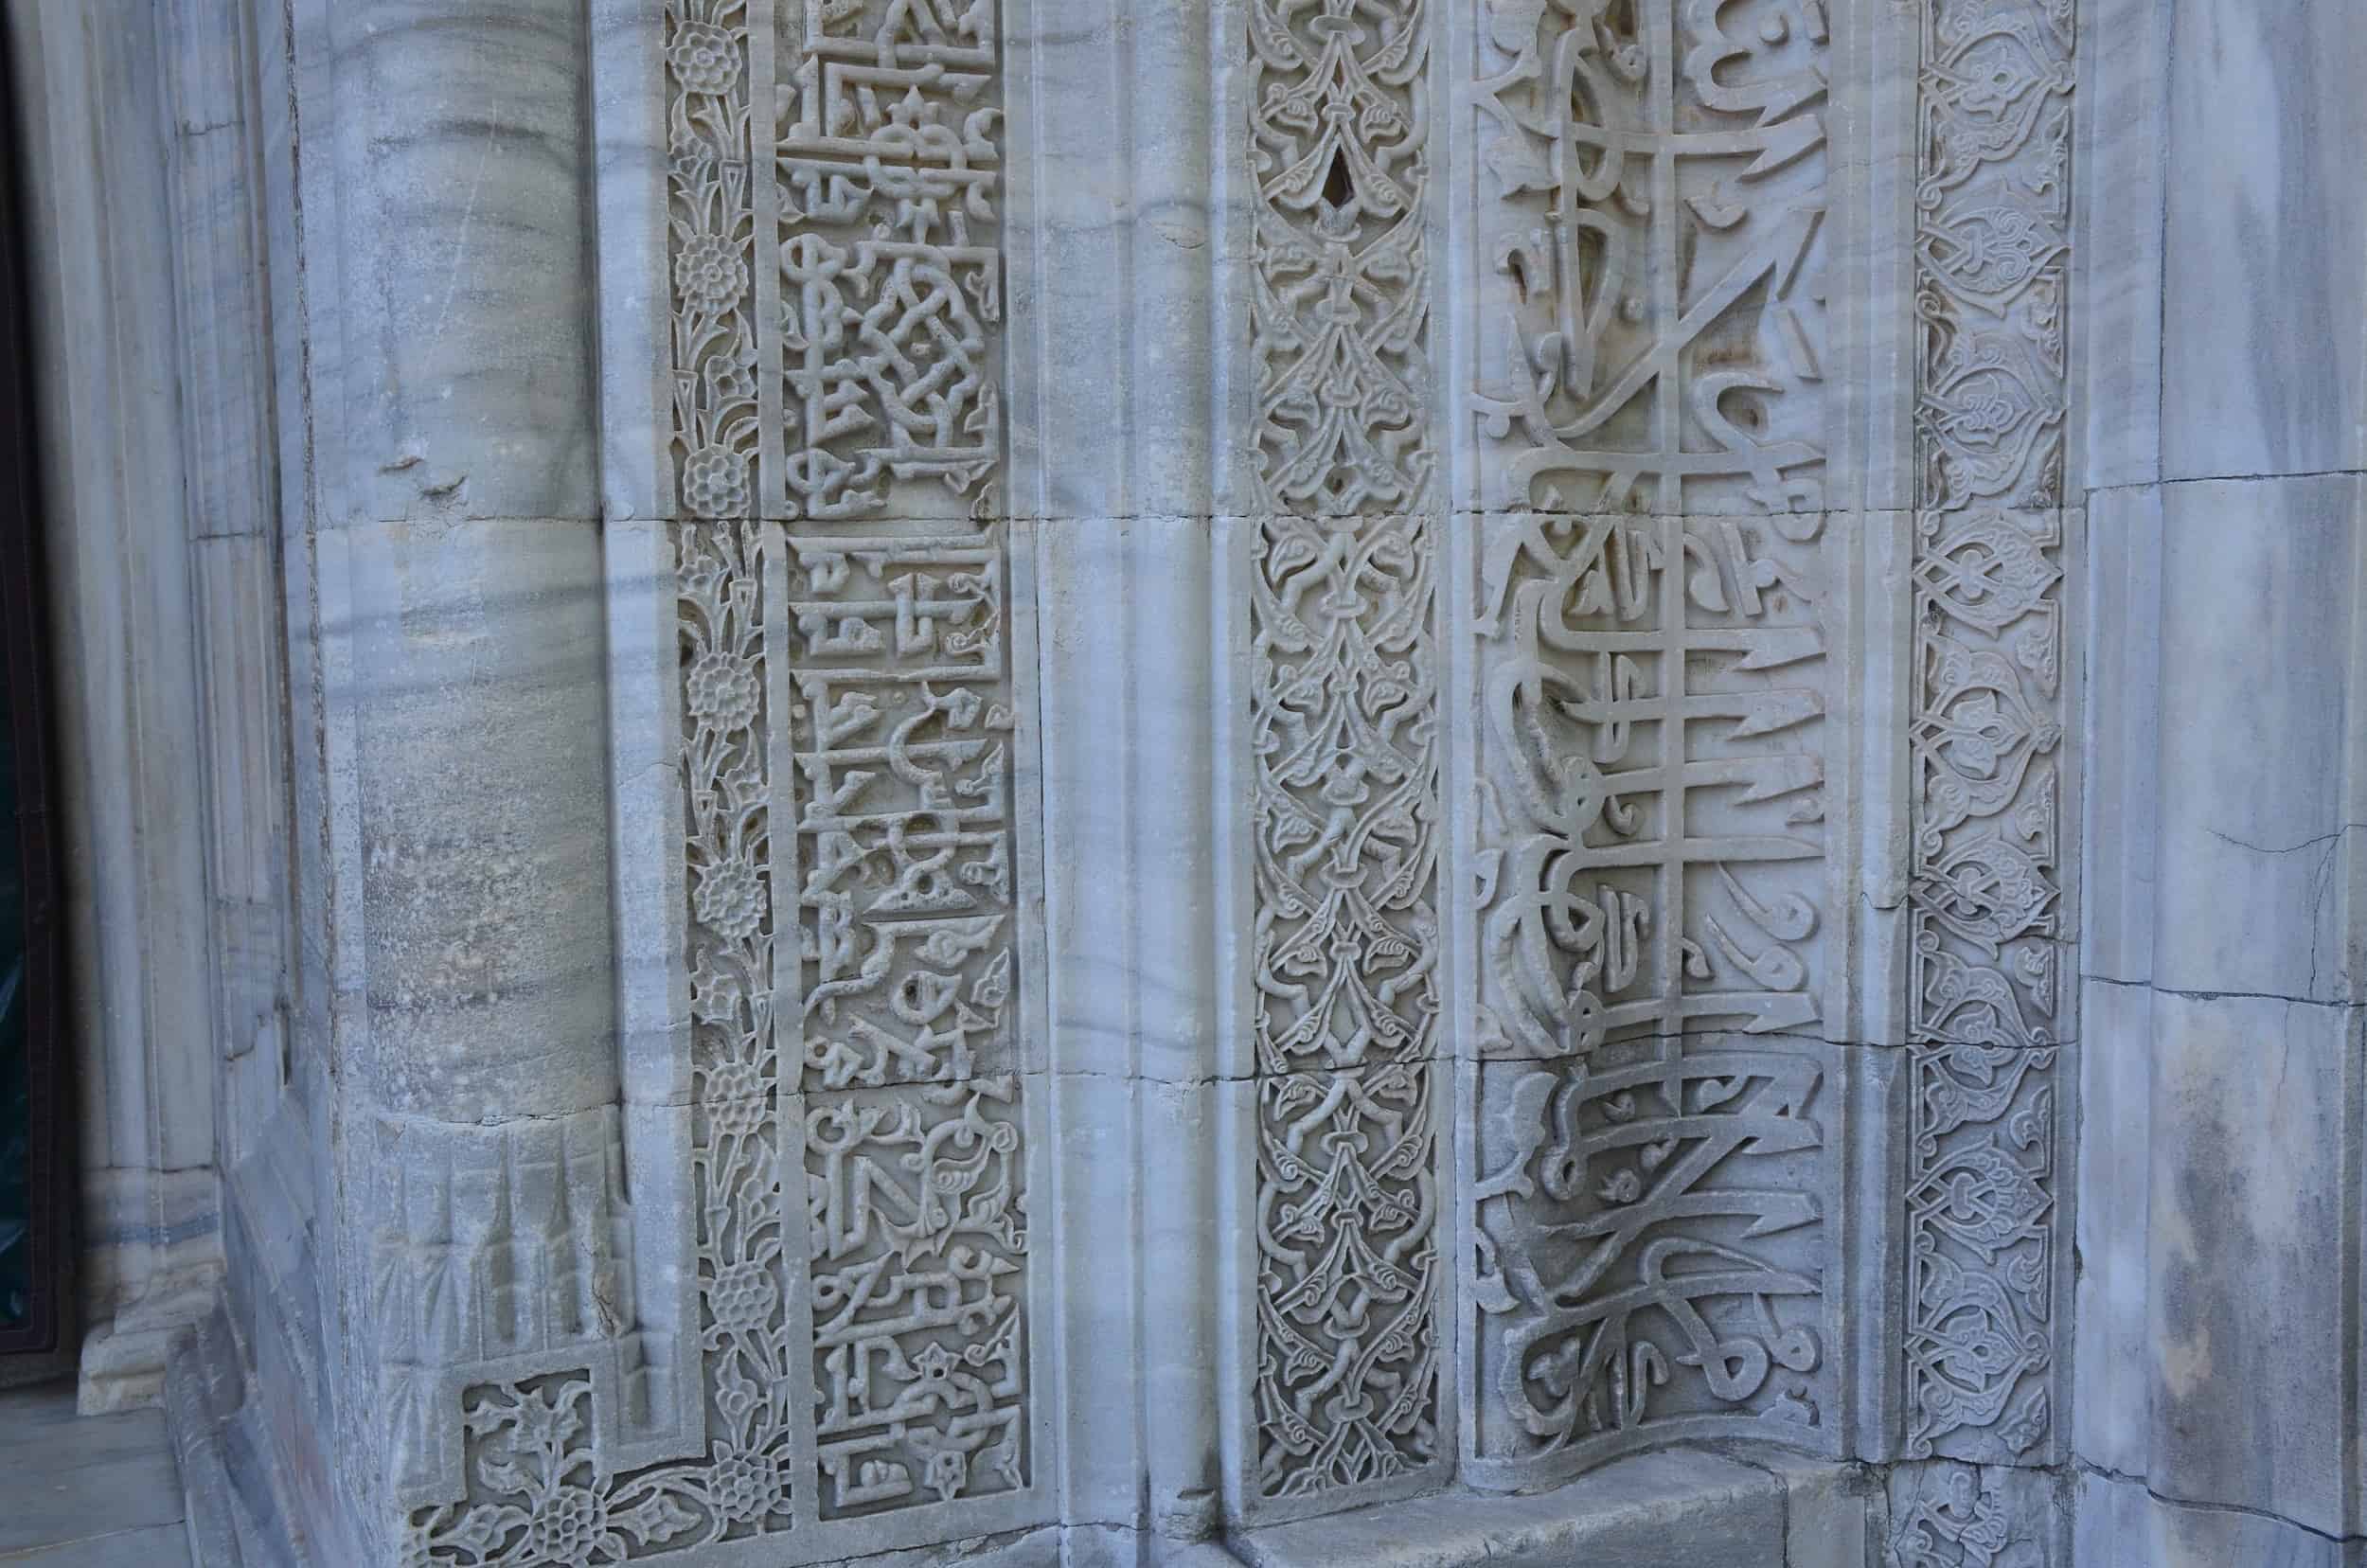 Carvings around the entrance portal on the Green Mosque in Bursa, Turkey